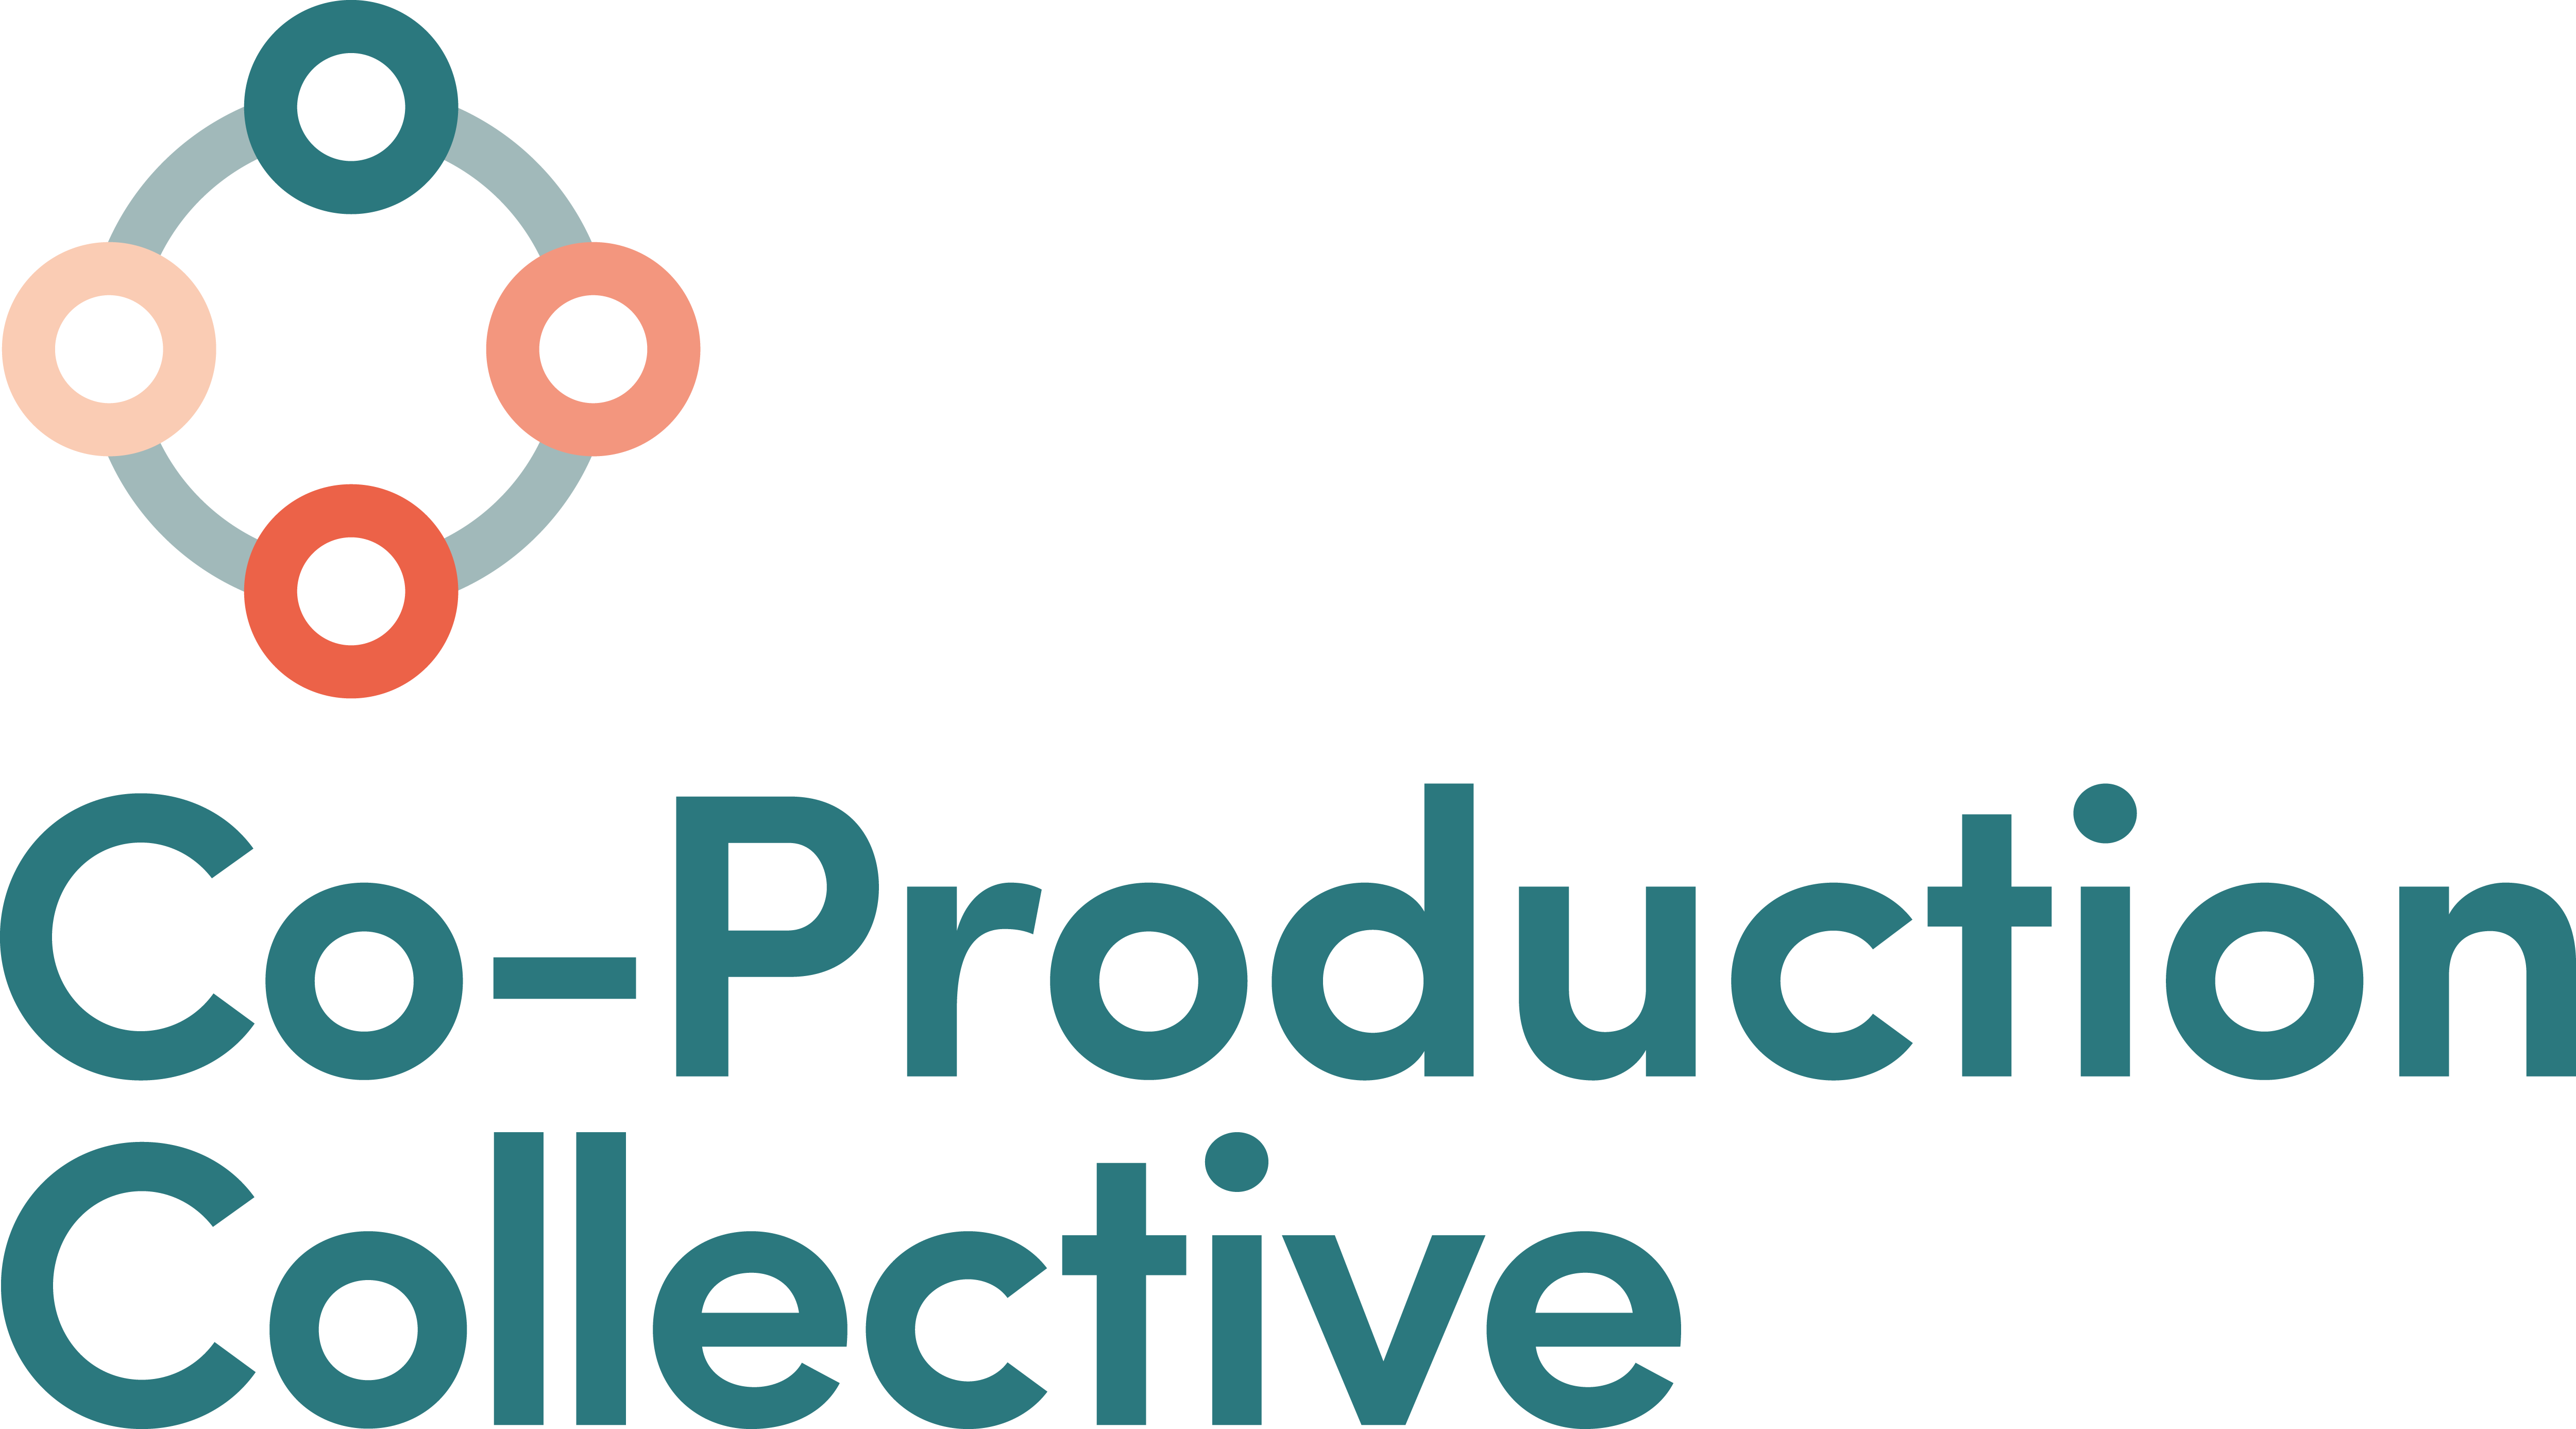 Co-Production Collective